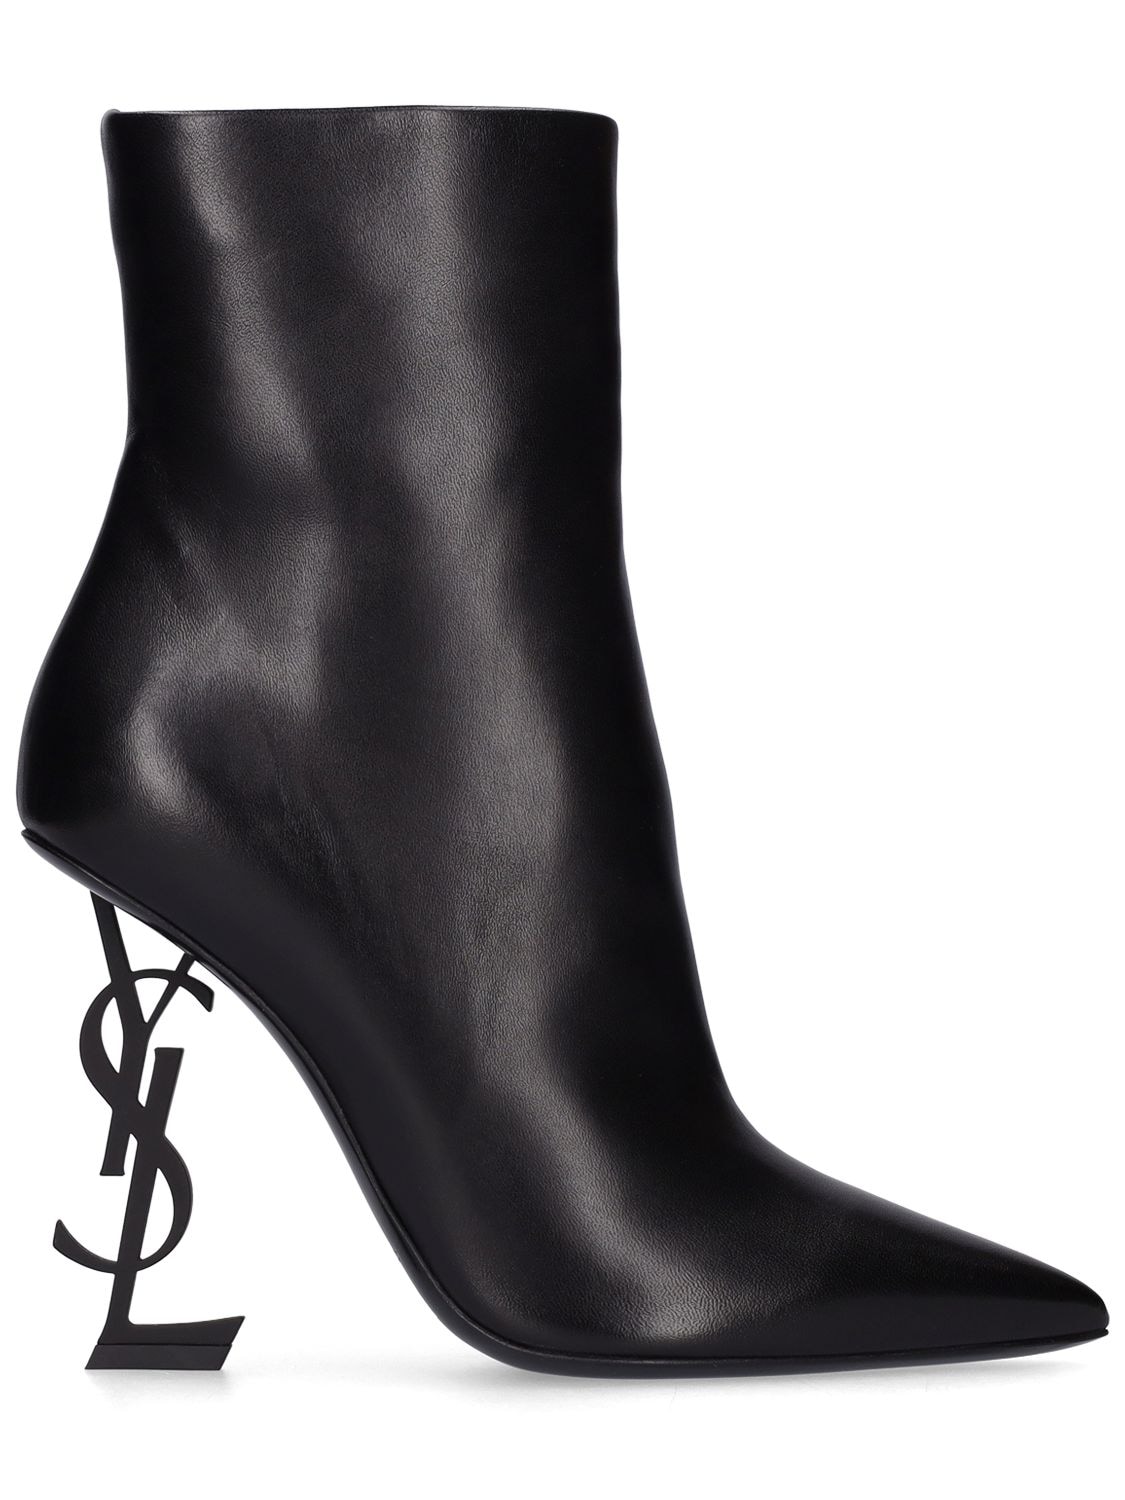 Saint Laurent 110mm Opyum Leather Boots In Black